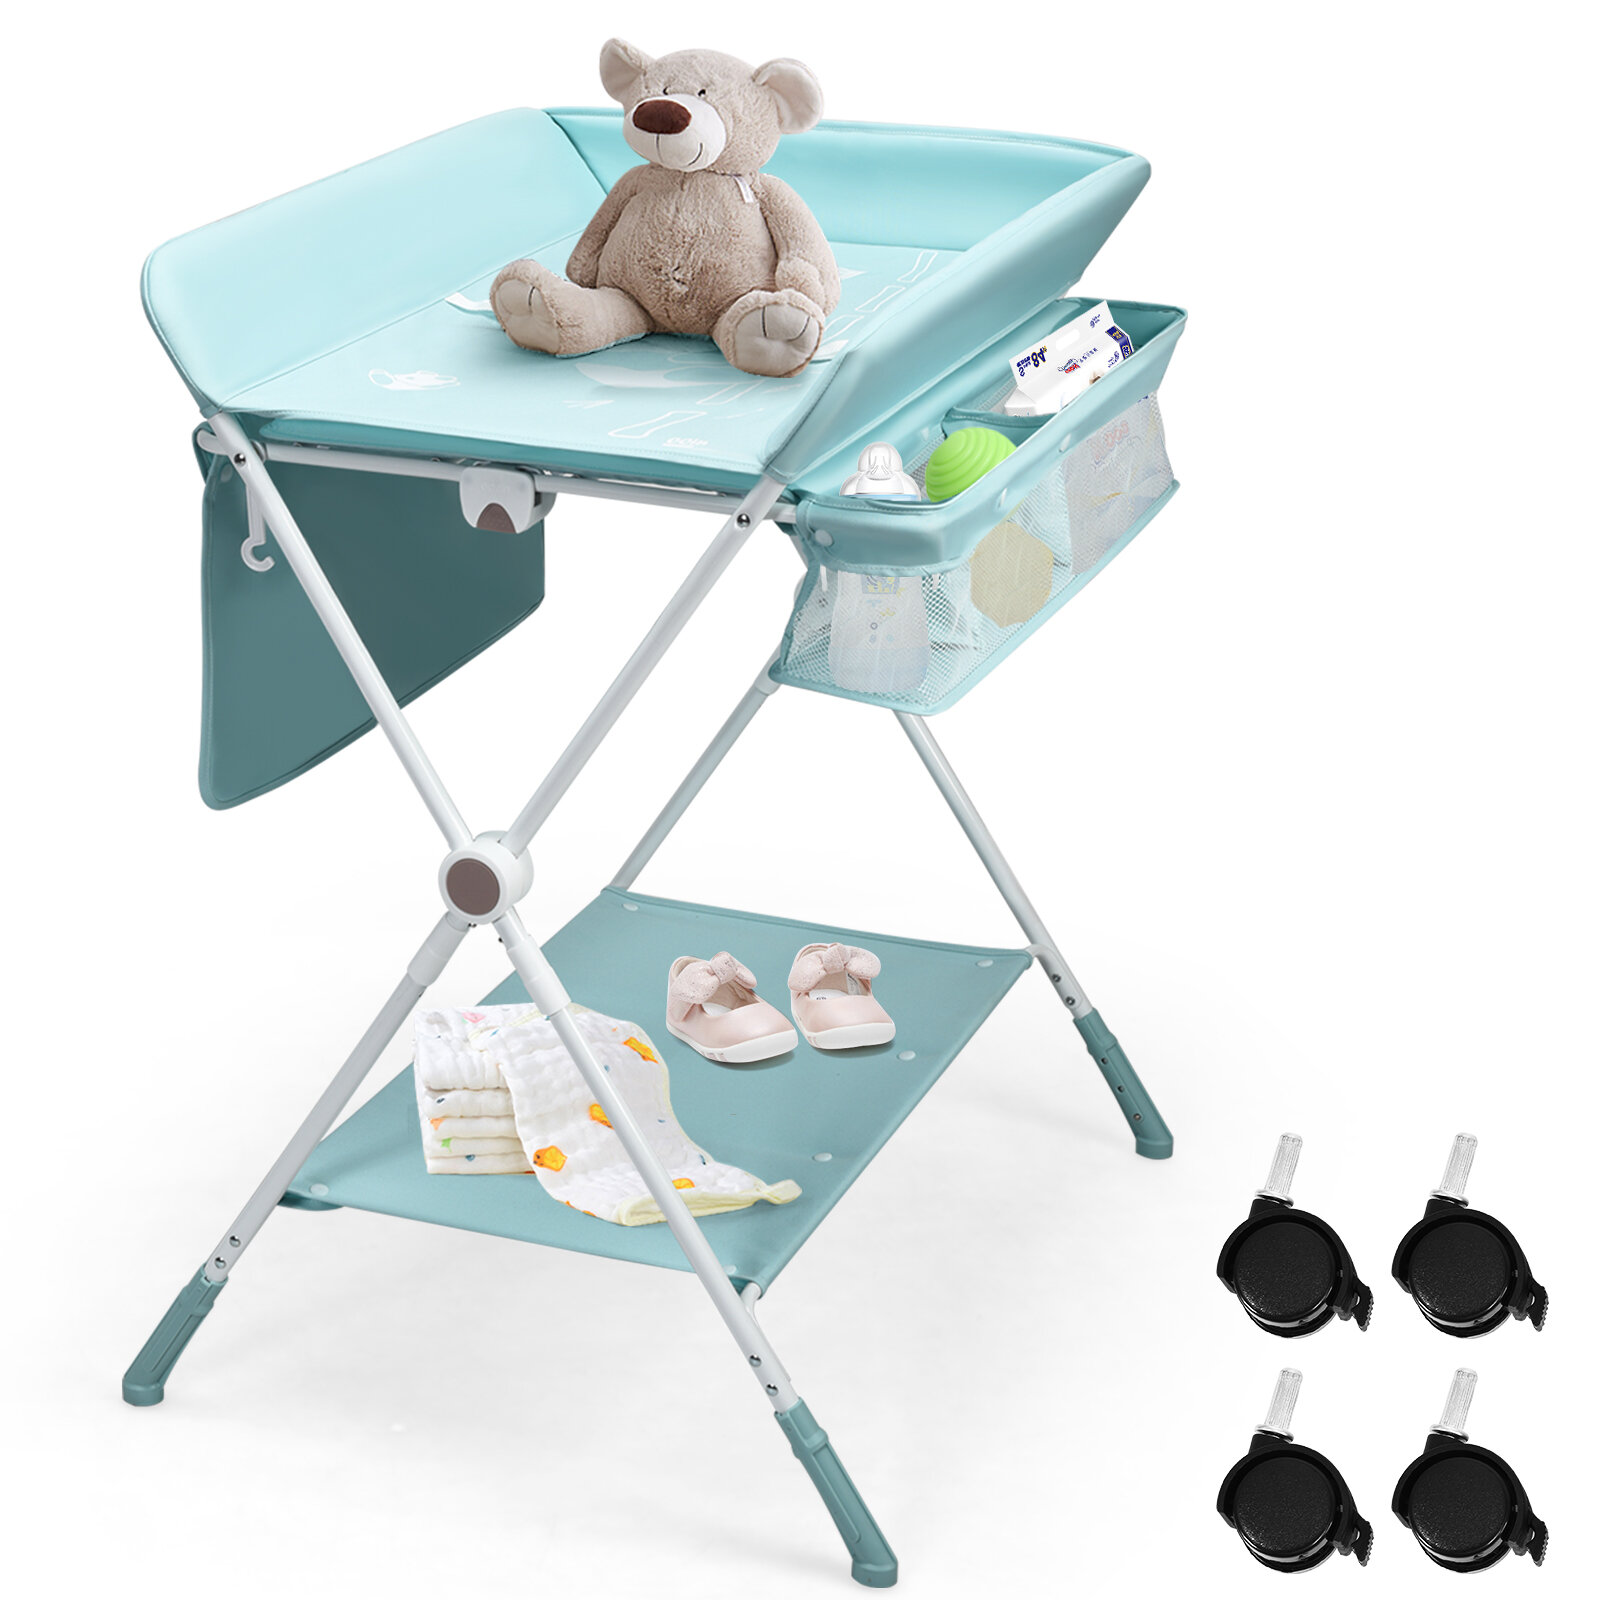 Baby Changing Table Portable Multi-purpose Diaper Station Adjustable